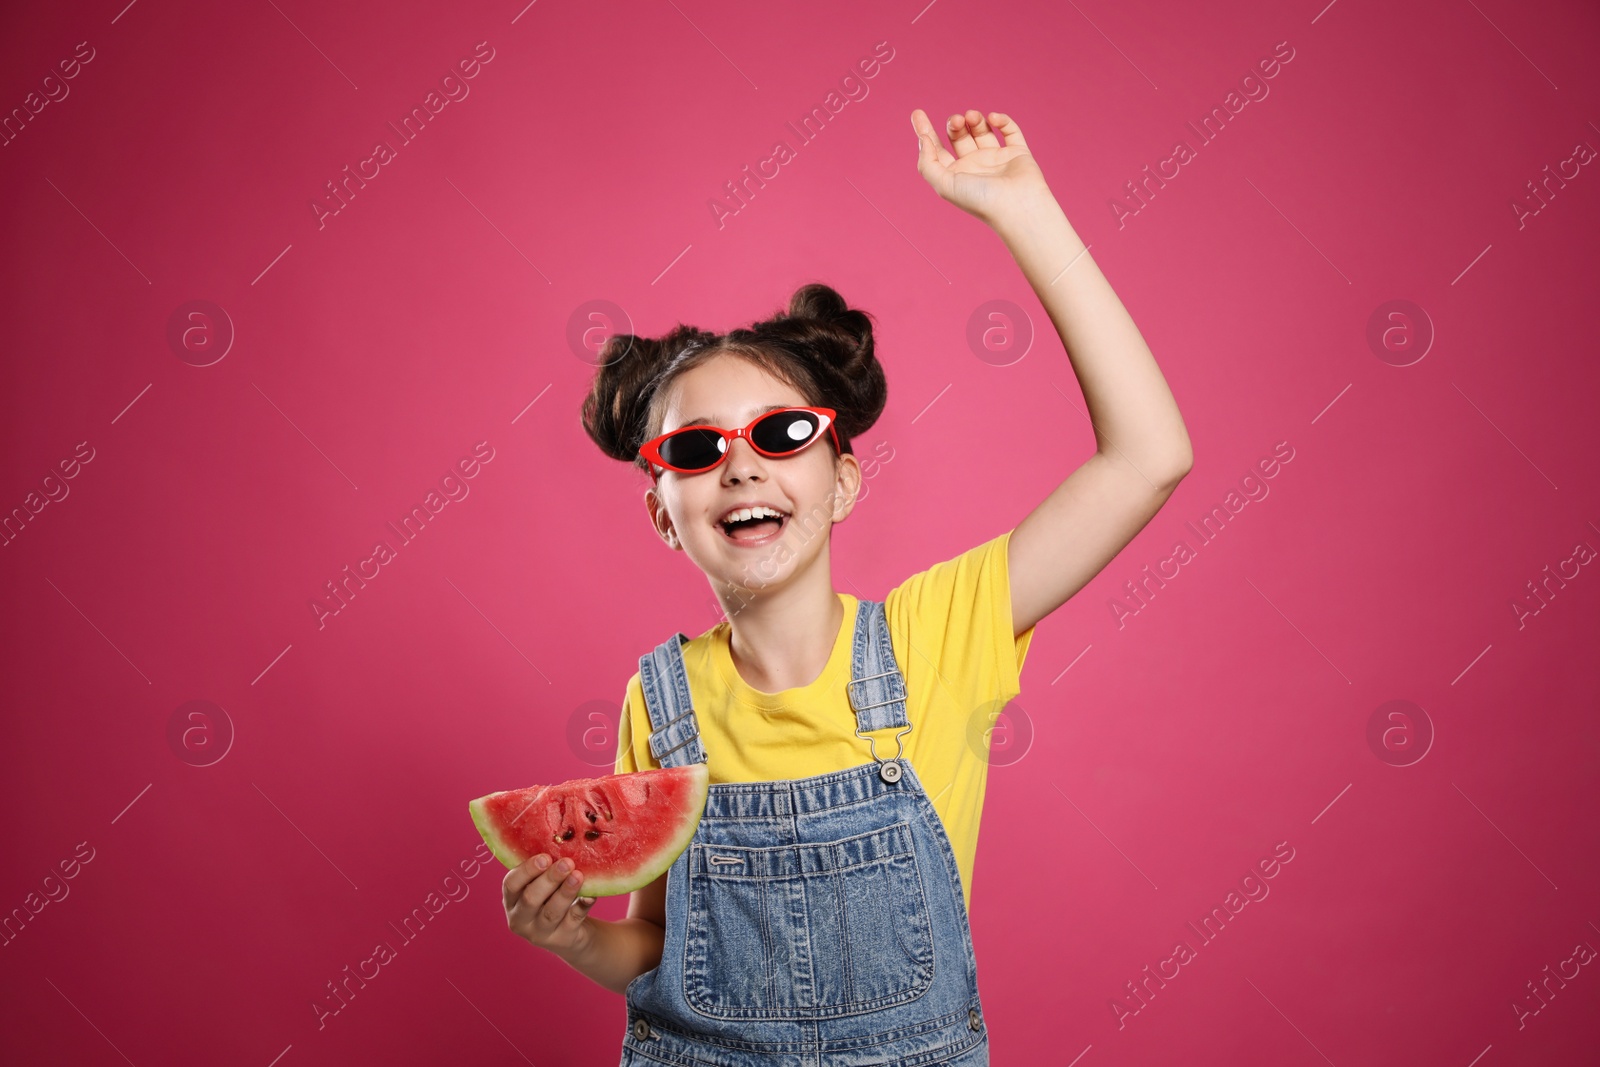 Photo of Cute little girl with watermelon on pink background